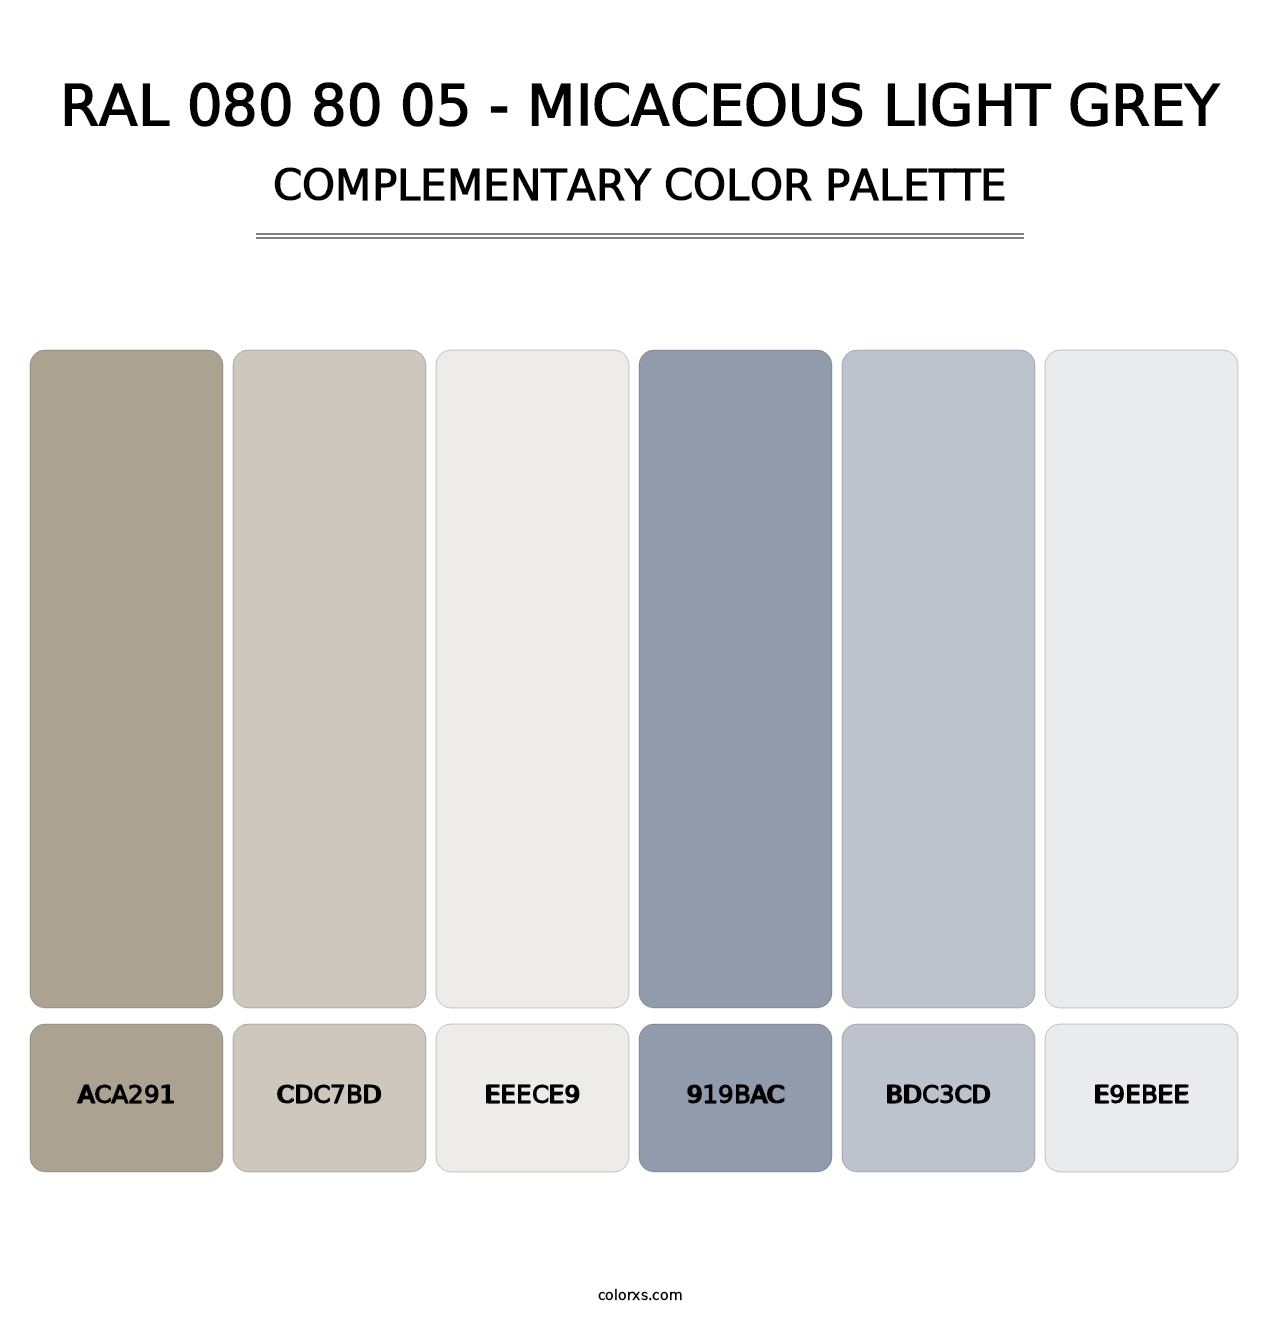 RAL 080 80 05 - Micaceous Light Grey - Complementary Color Palette